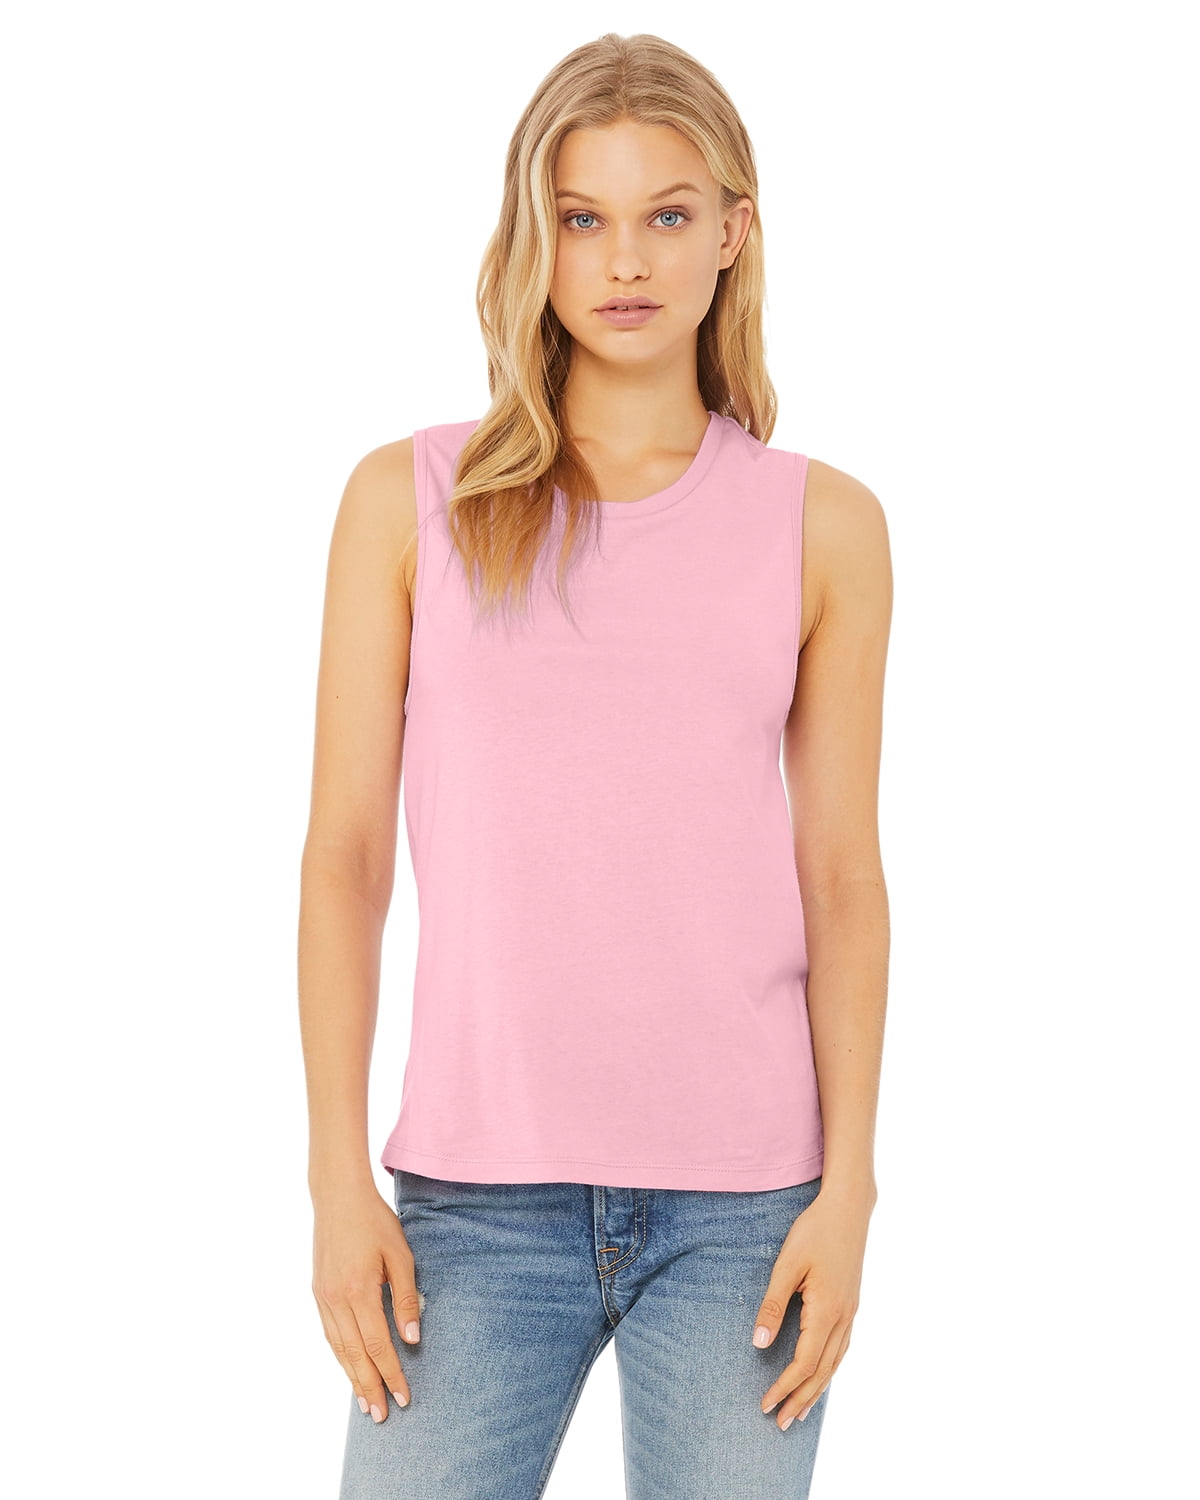 BELLA+CANVAS - Bella + Canvas, The Ladies' Jersey Muscle Tank - LILAC ...